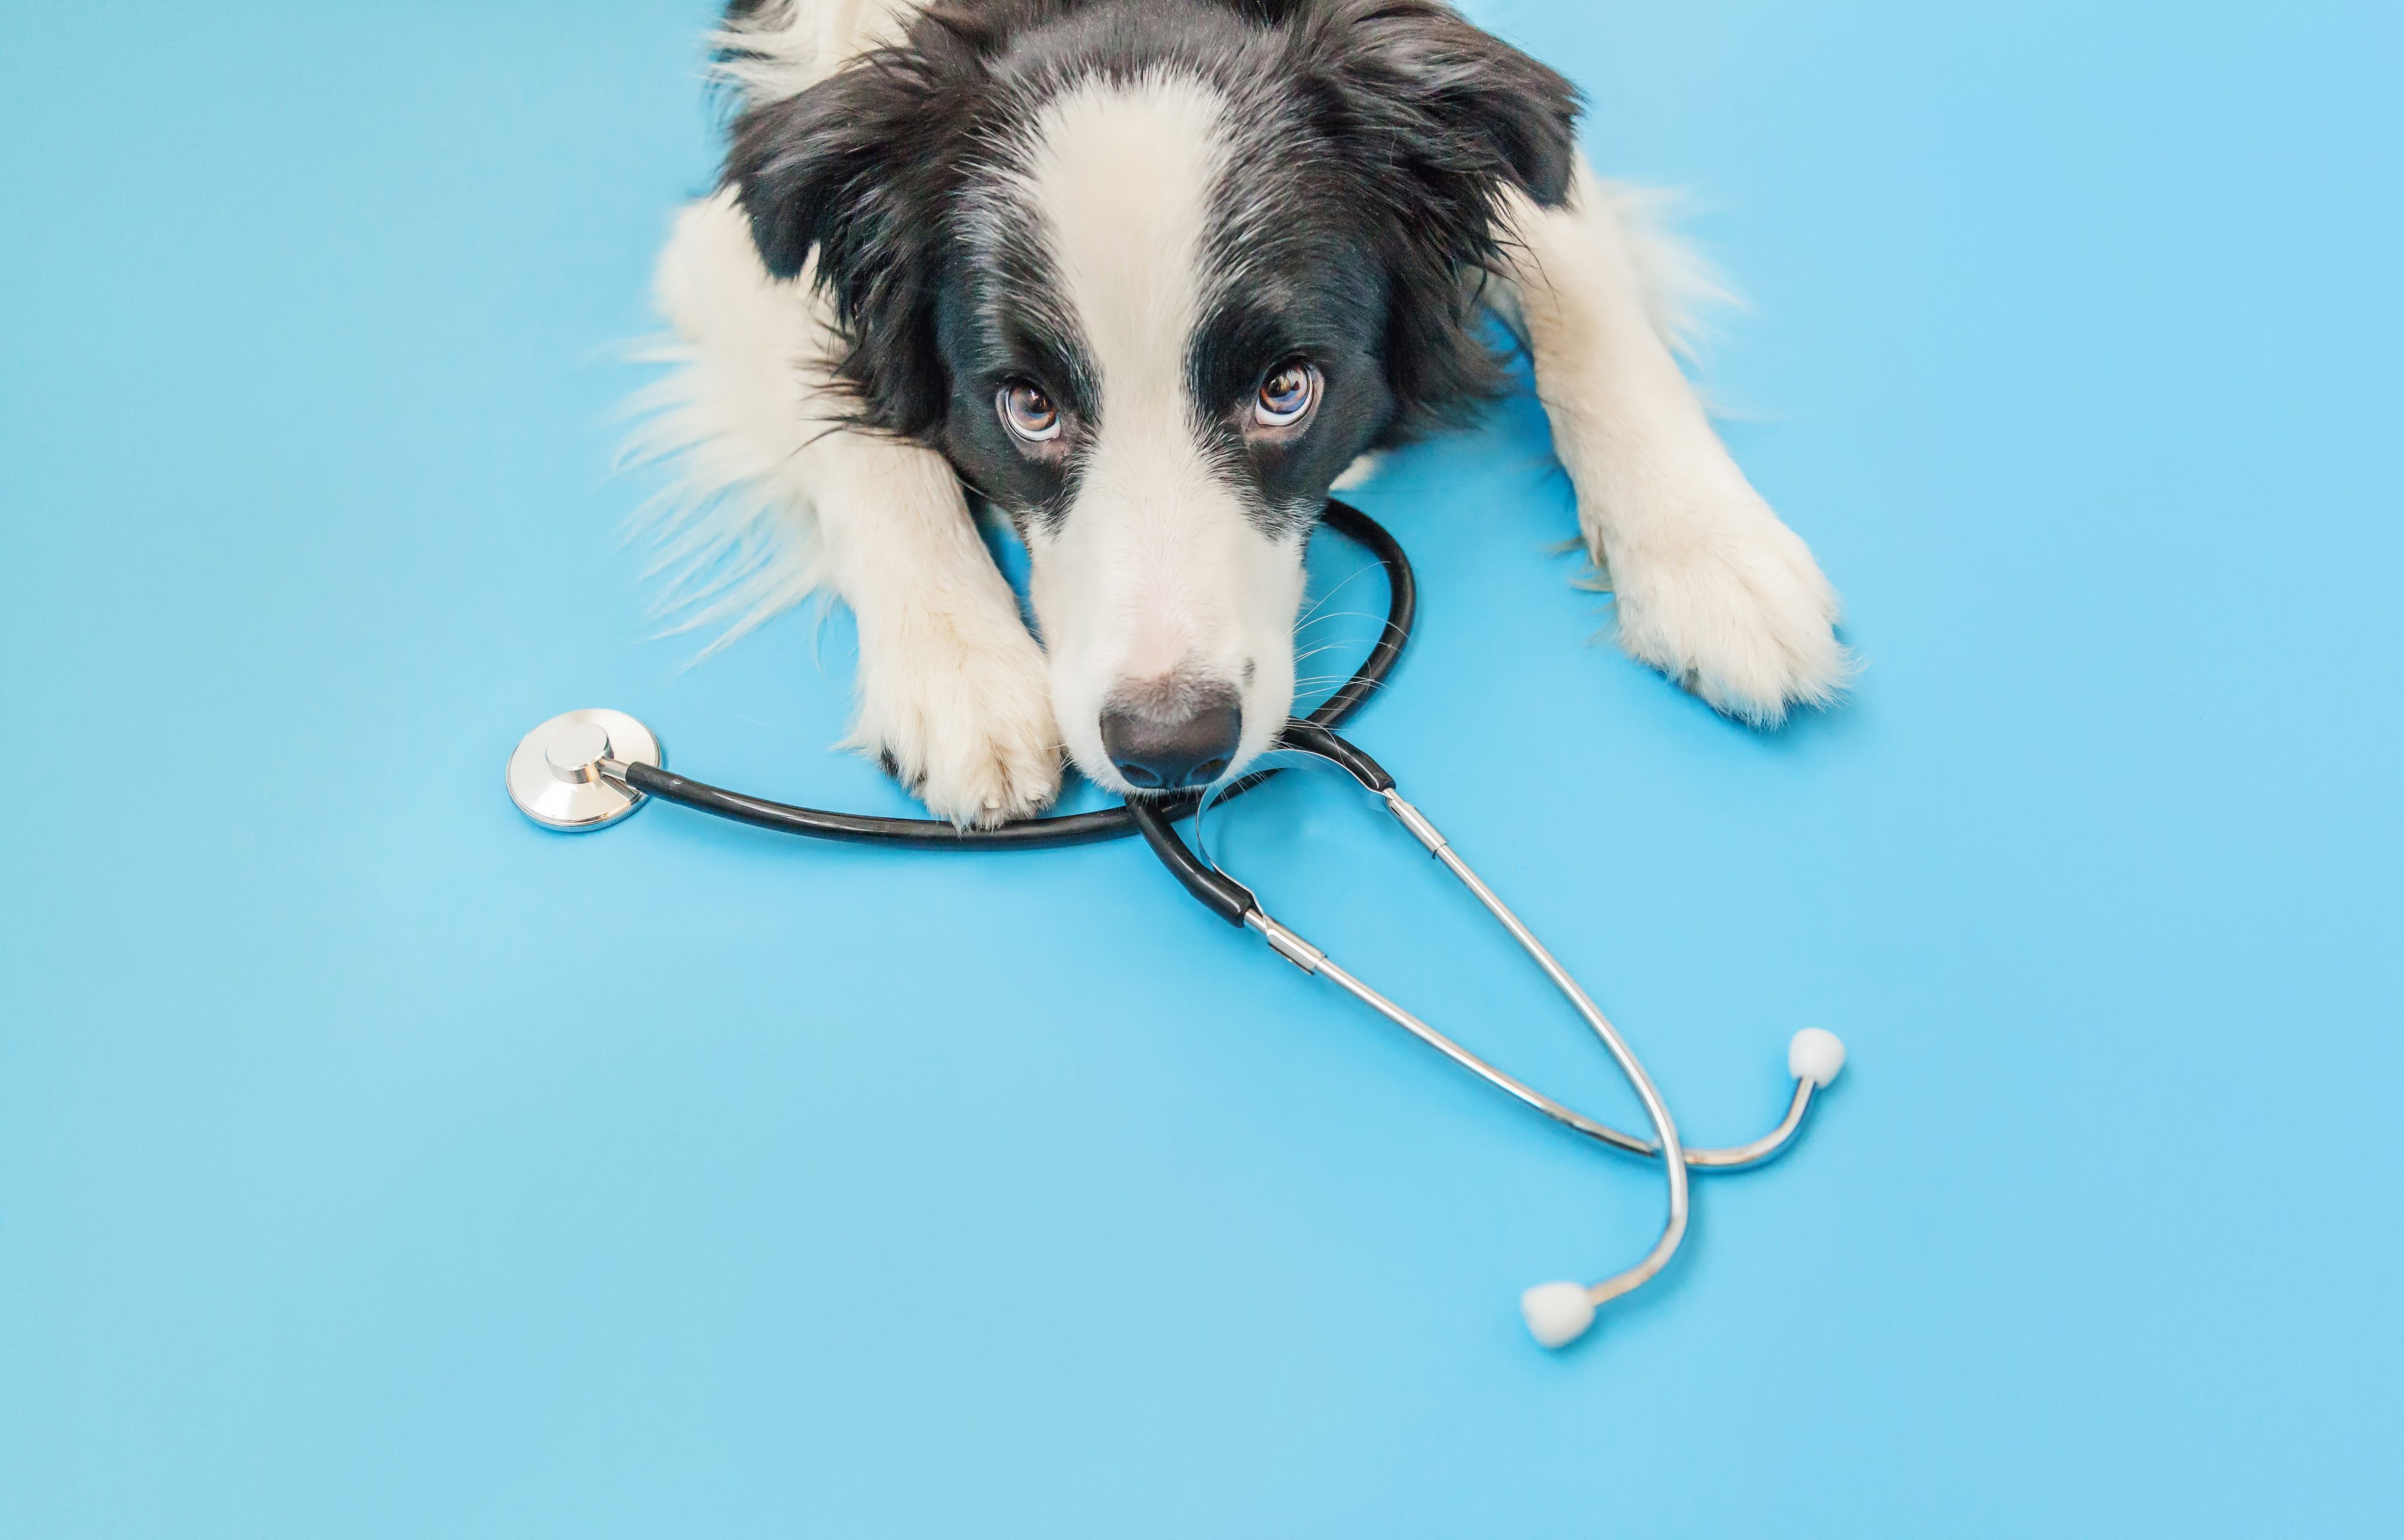 The dog is the nurse actually, and he would appreciate some respect. Photo: Shutterstock